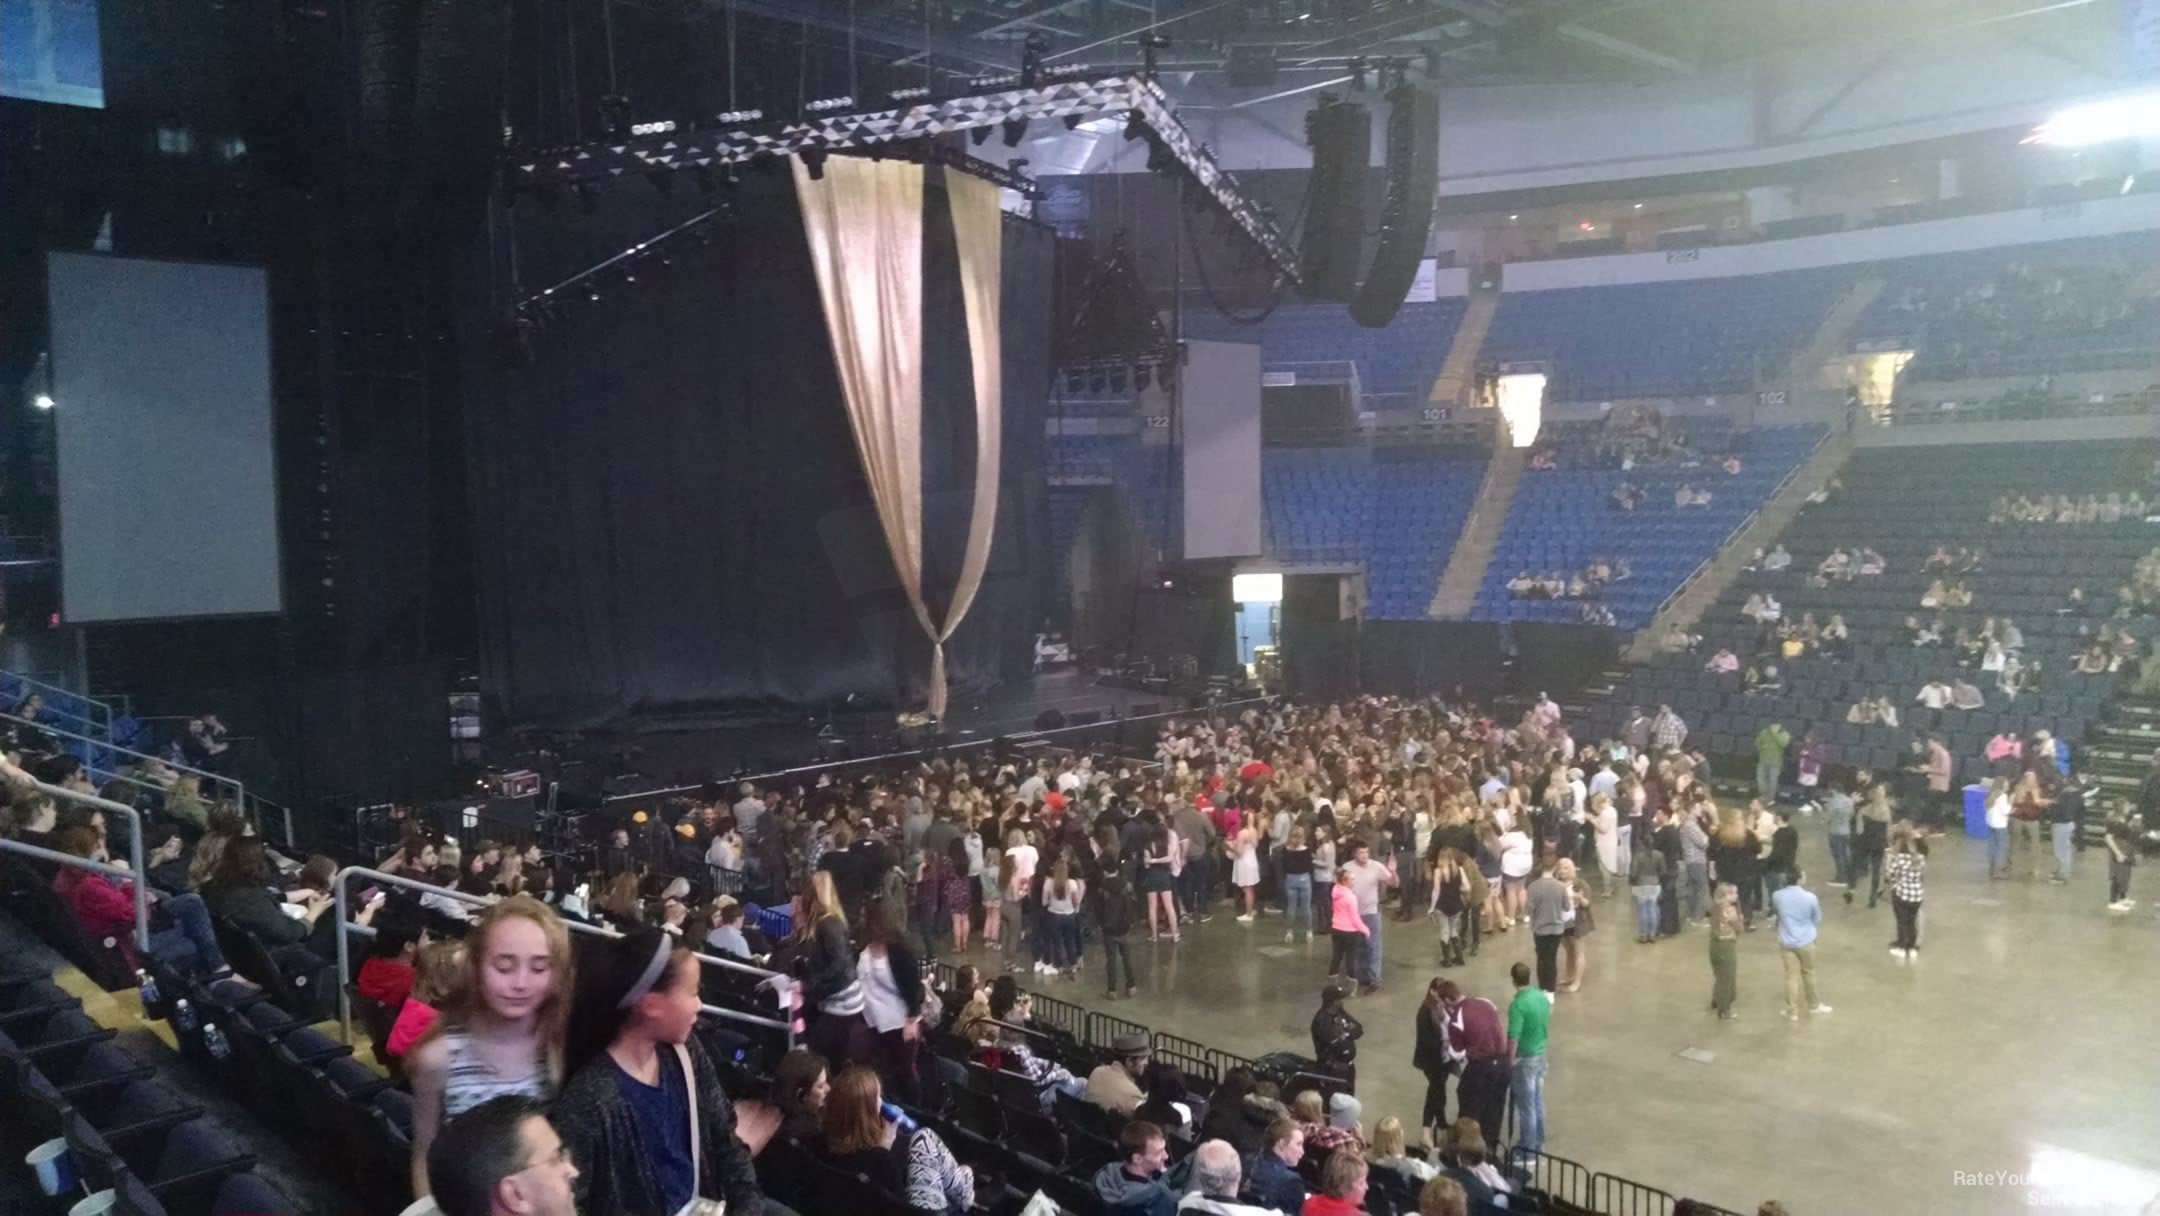 section 114, row p seat view  for concert - chaifetz arena